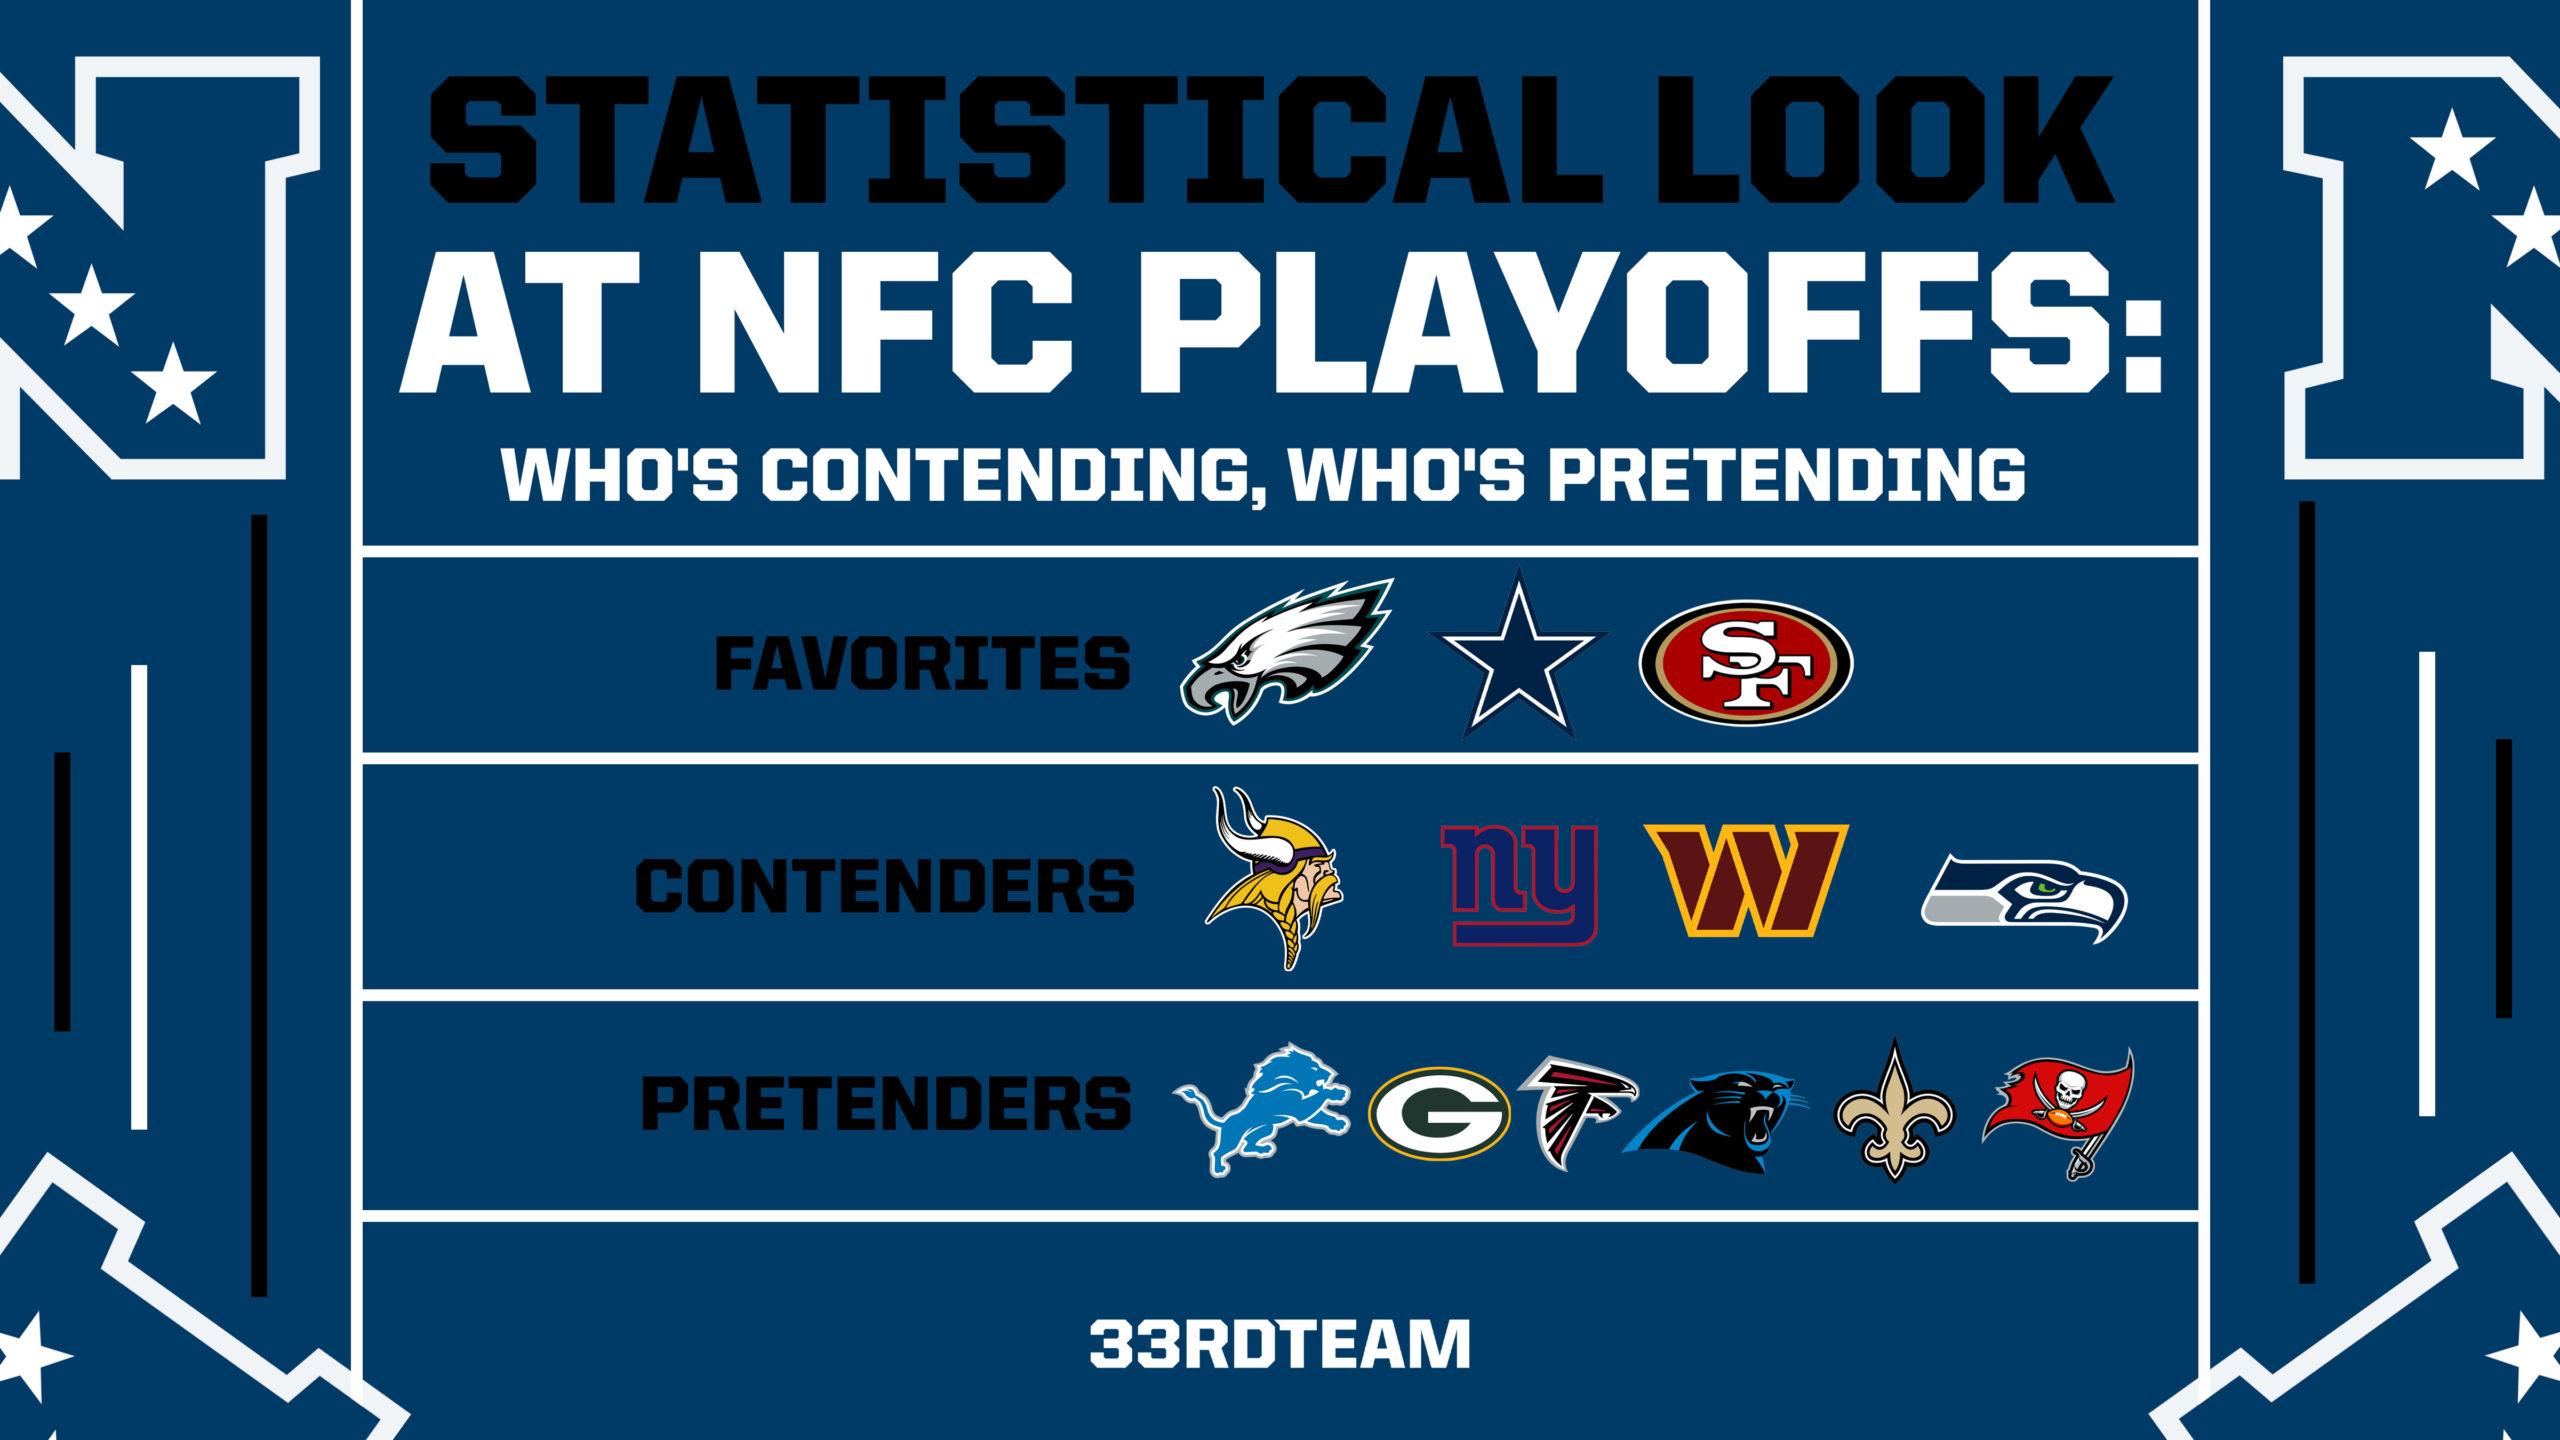 2022 NFC Playoff Picture: Who's Contending, Who's Pretending?